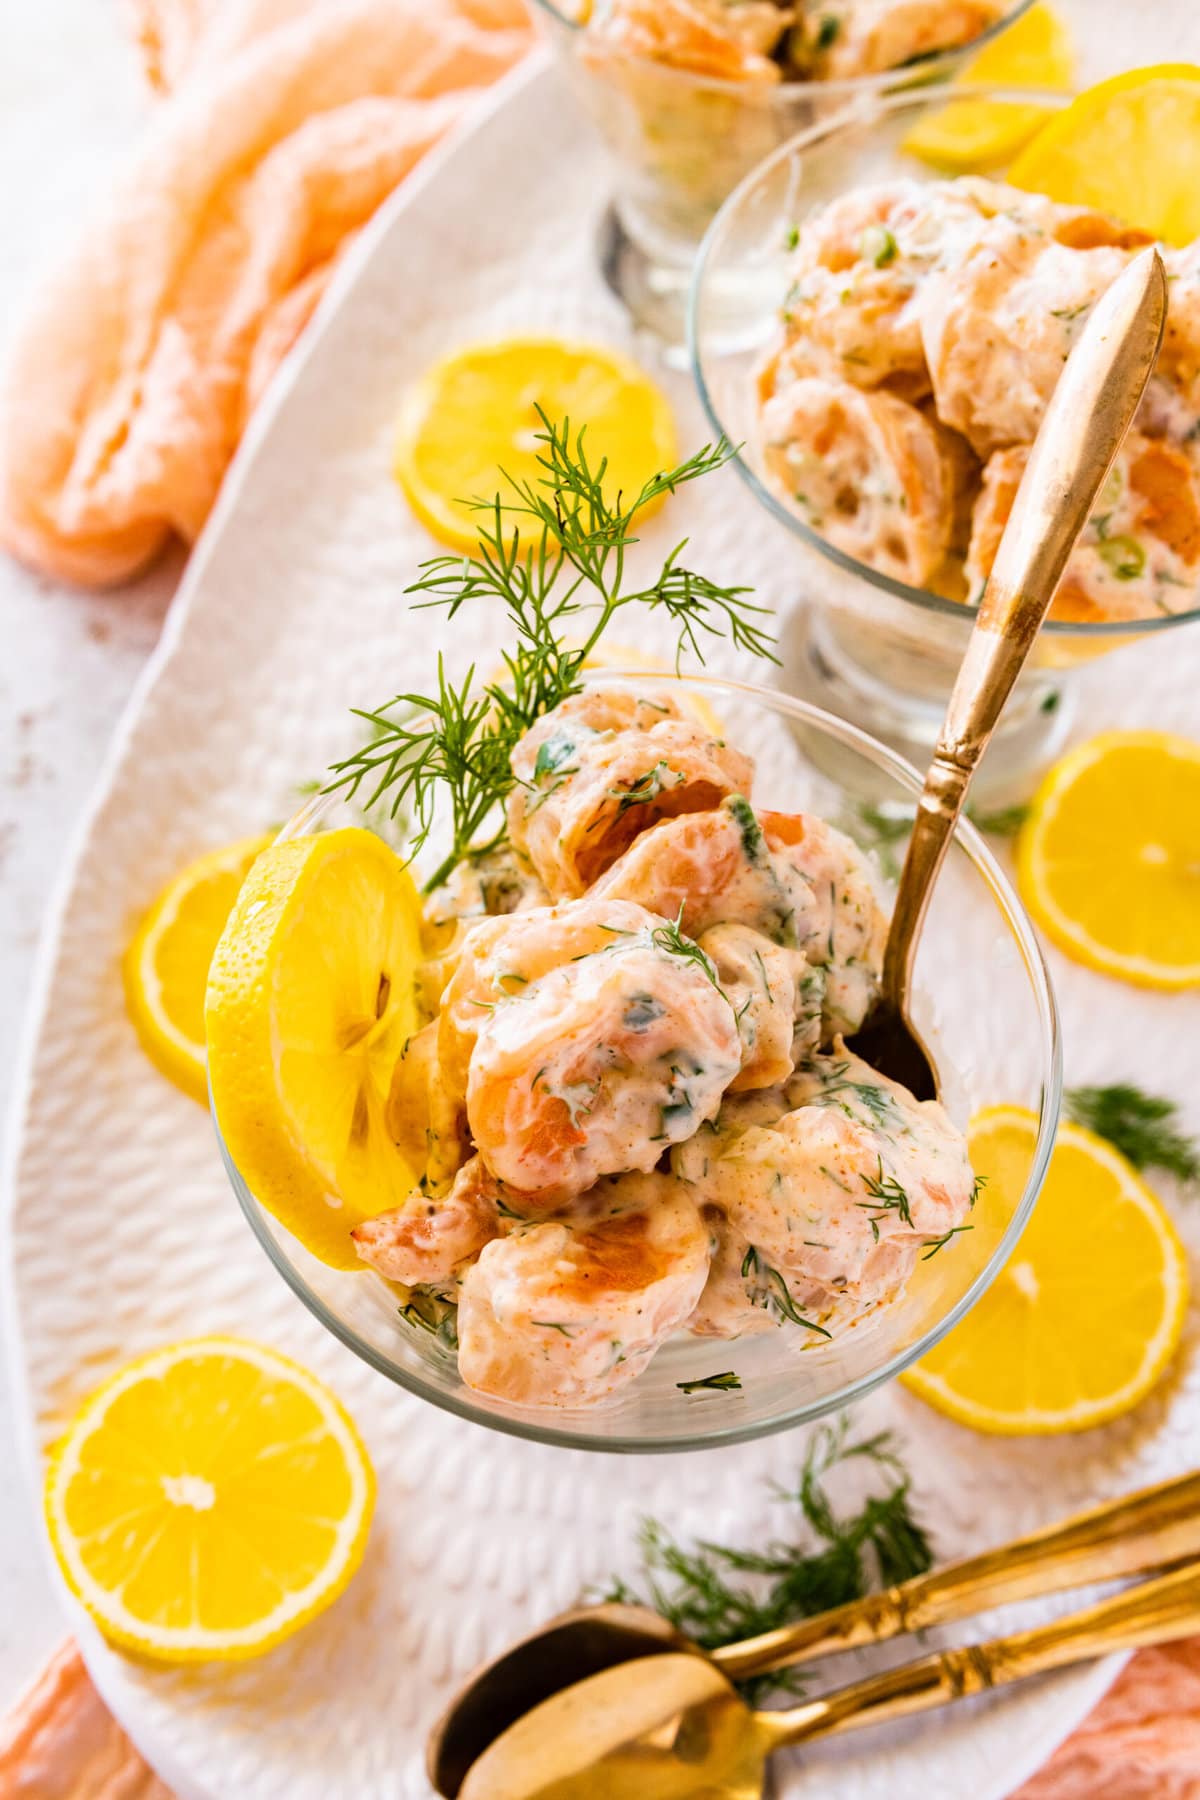 easy shrimp salad recipe in a small clear serving class with lemon and dill as decoration.